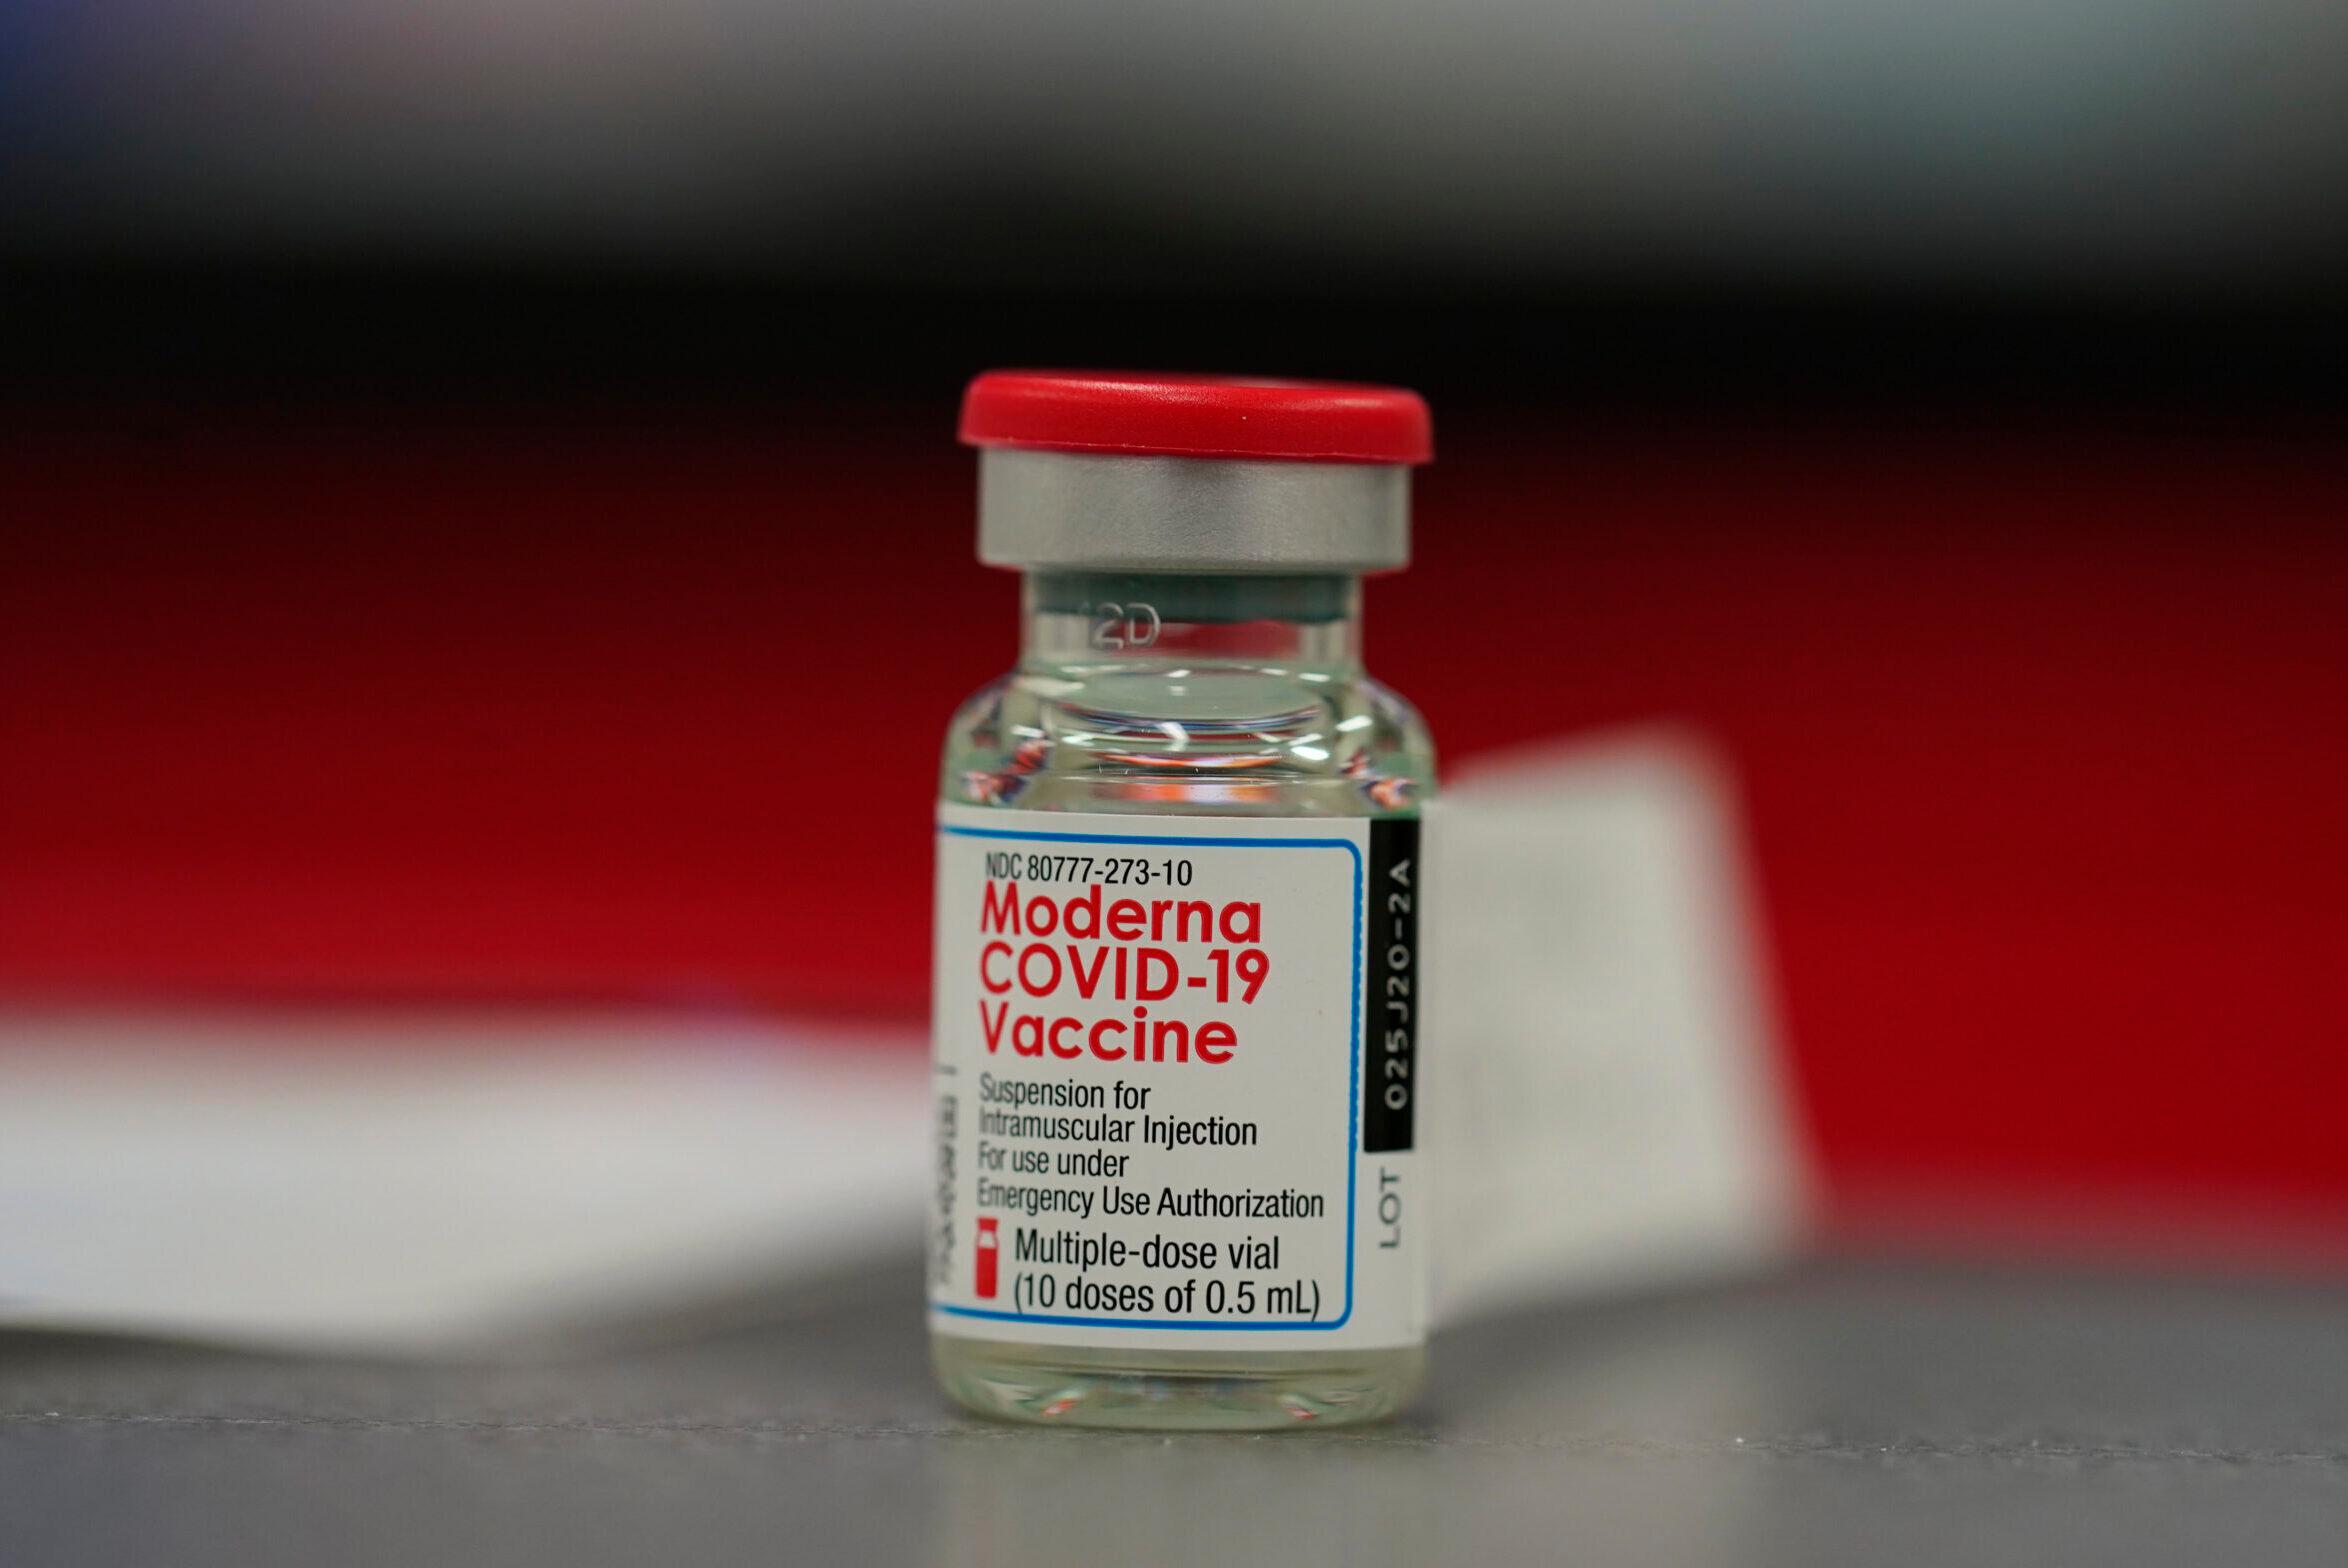 A vial of the COVID-19 vaccine from Moderna.